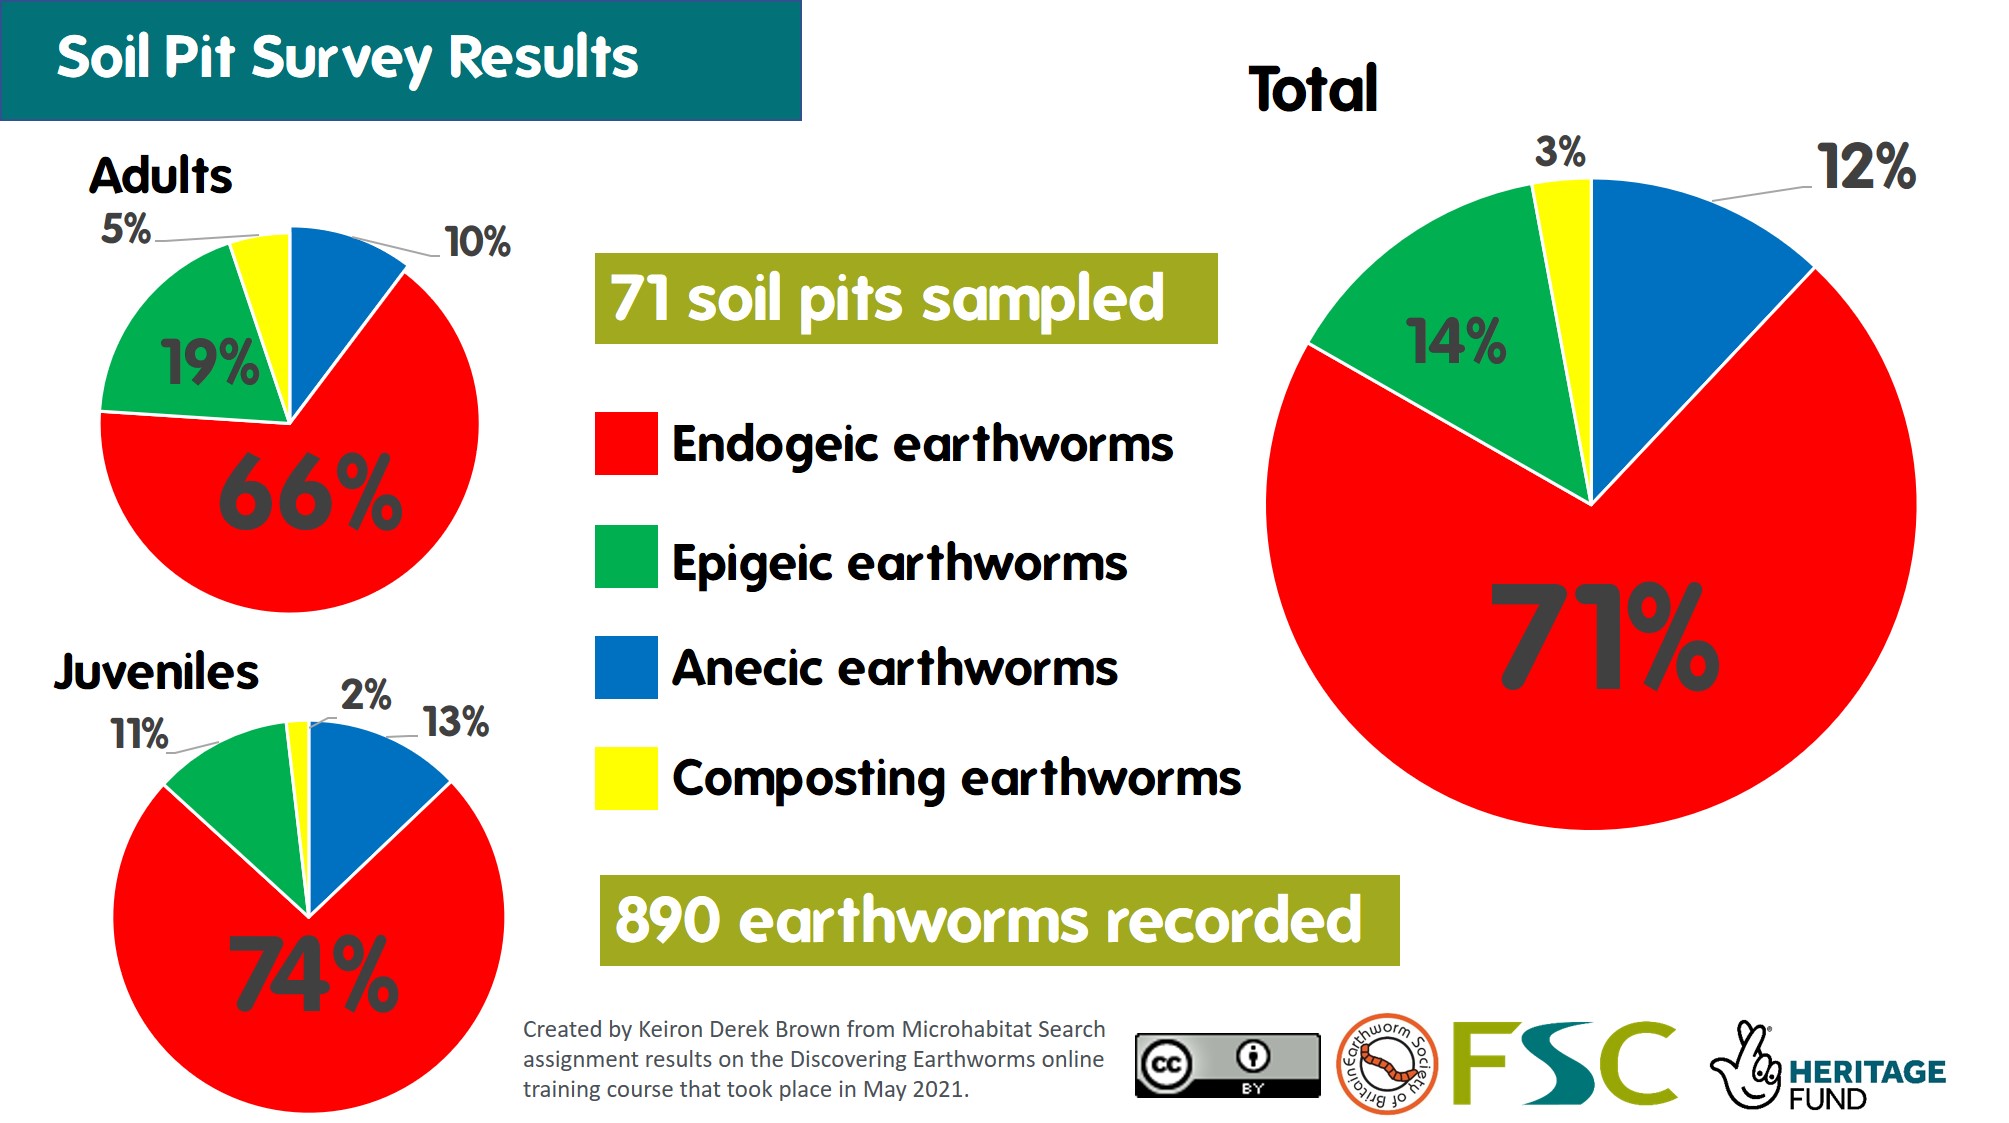 Pie charts showing breakdowns of earthworm ecological categories by juvenile, adult and total from soil pit surveying.